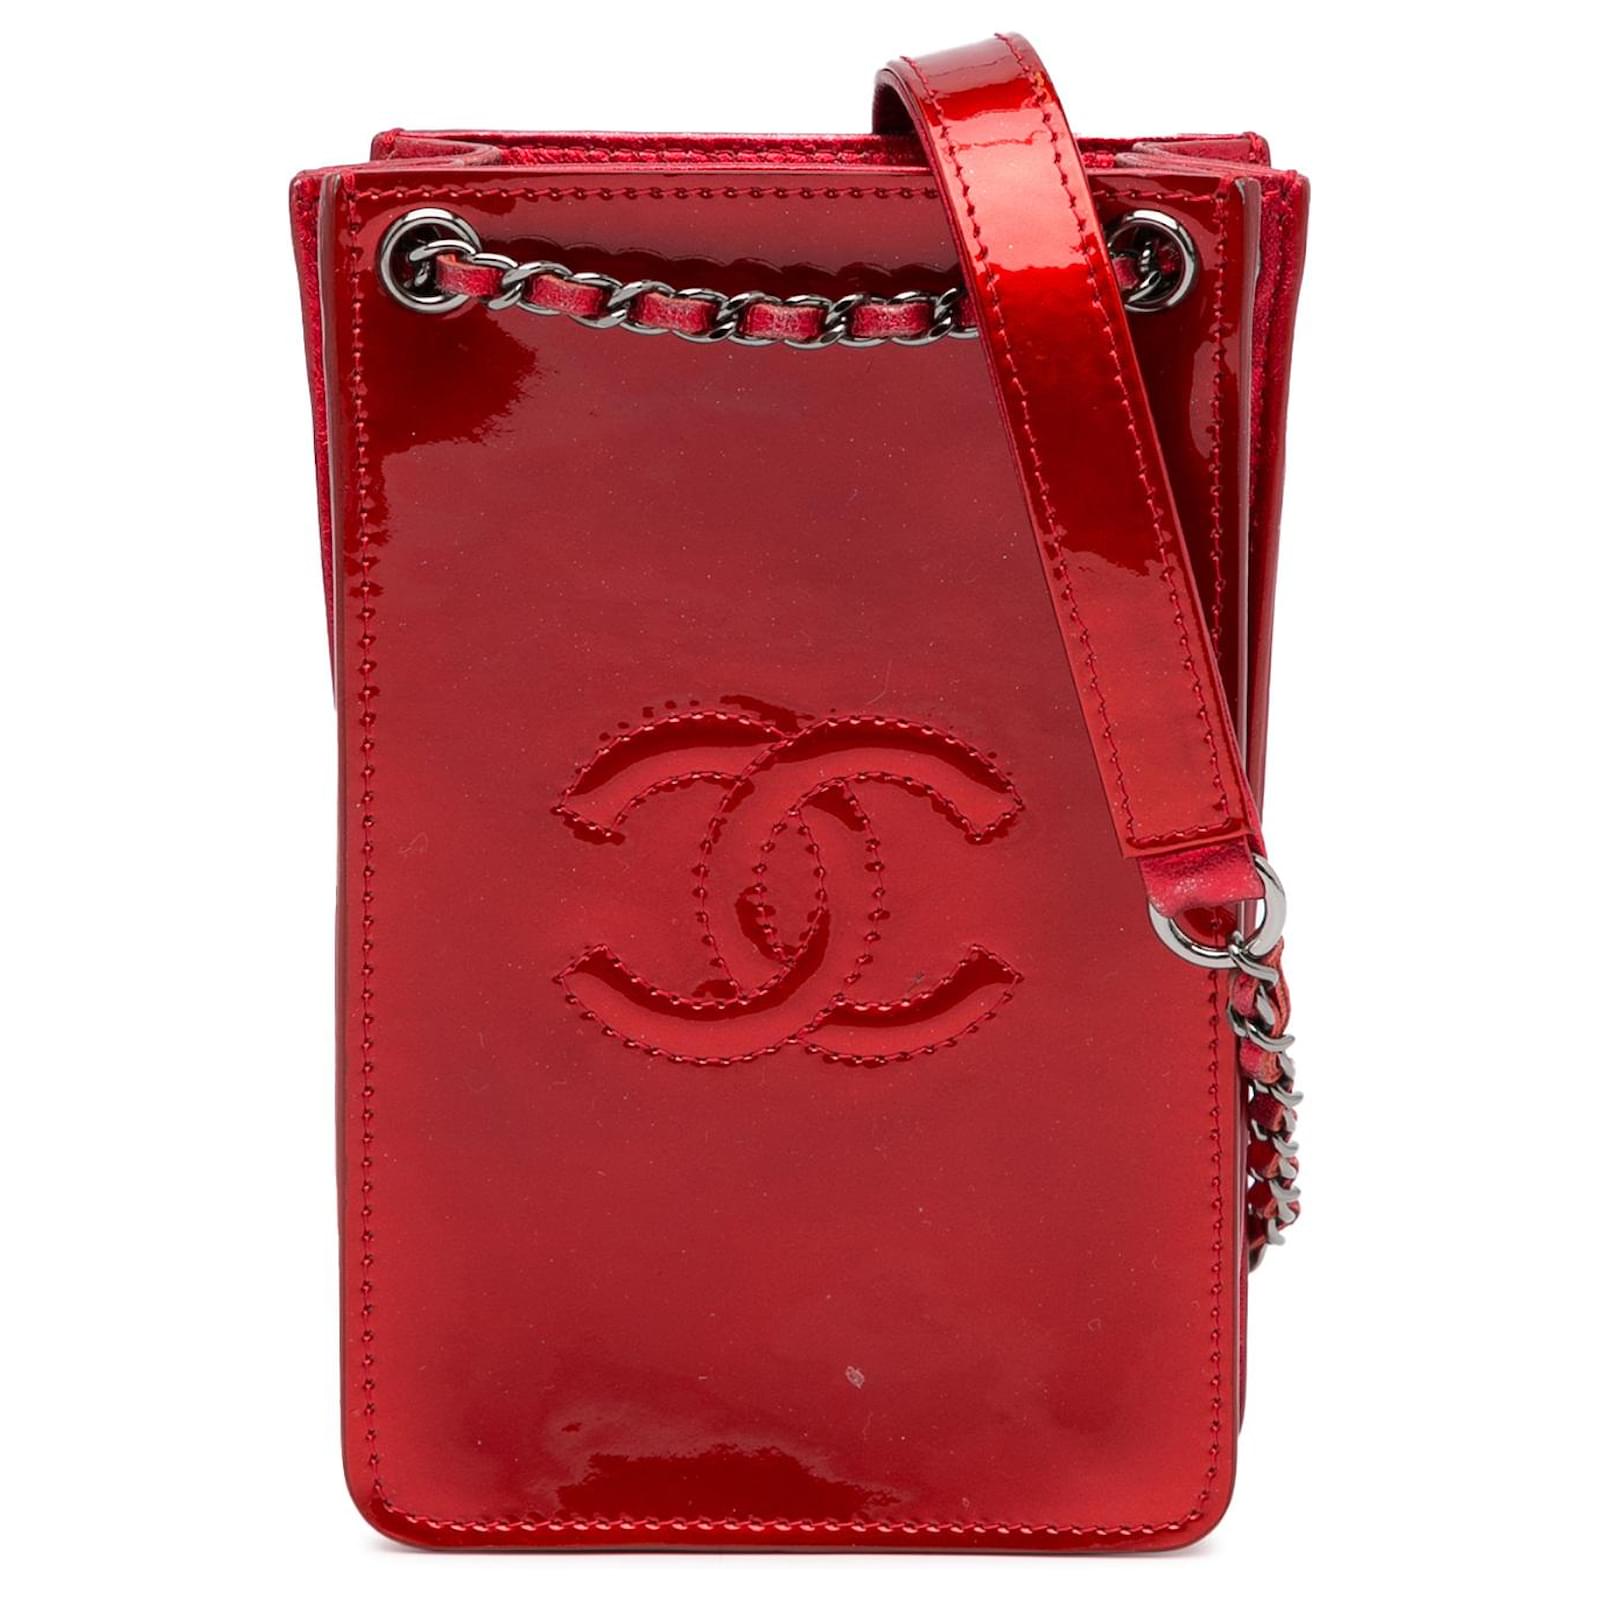 Chanel Red CC Phone Holder Chain Crossbody Leather Patent leather